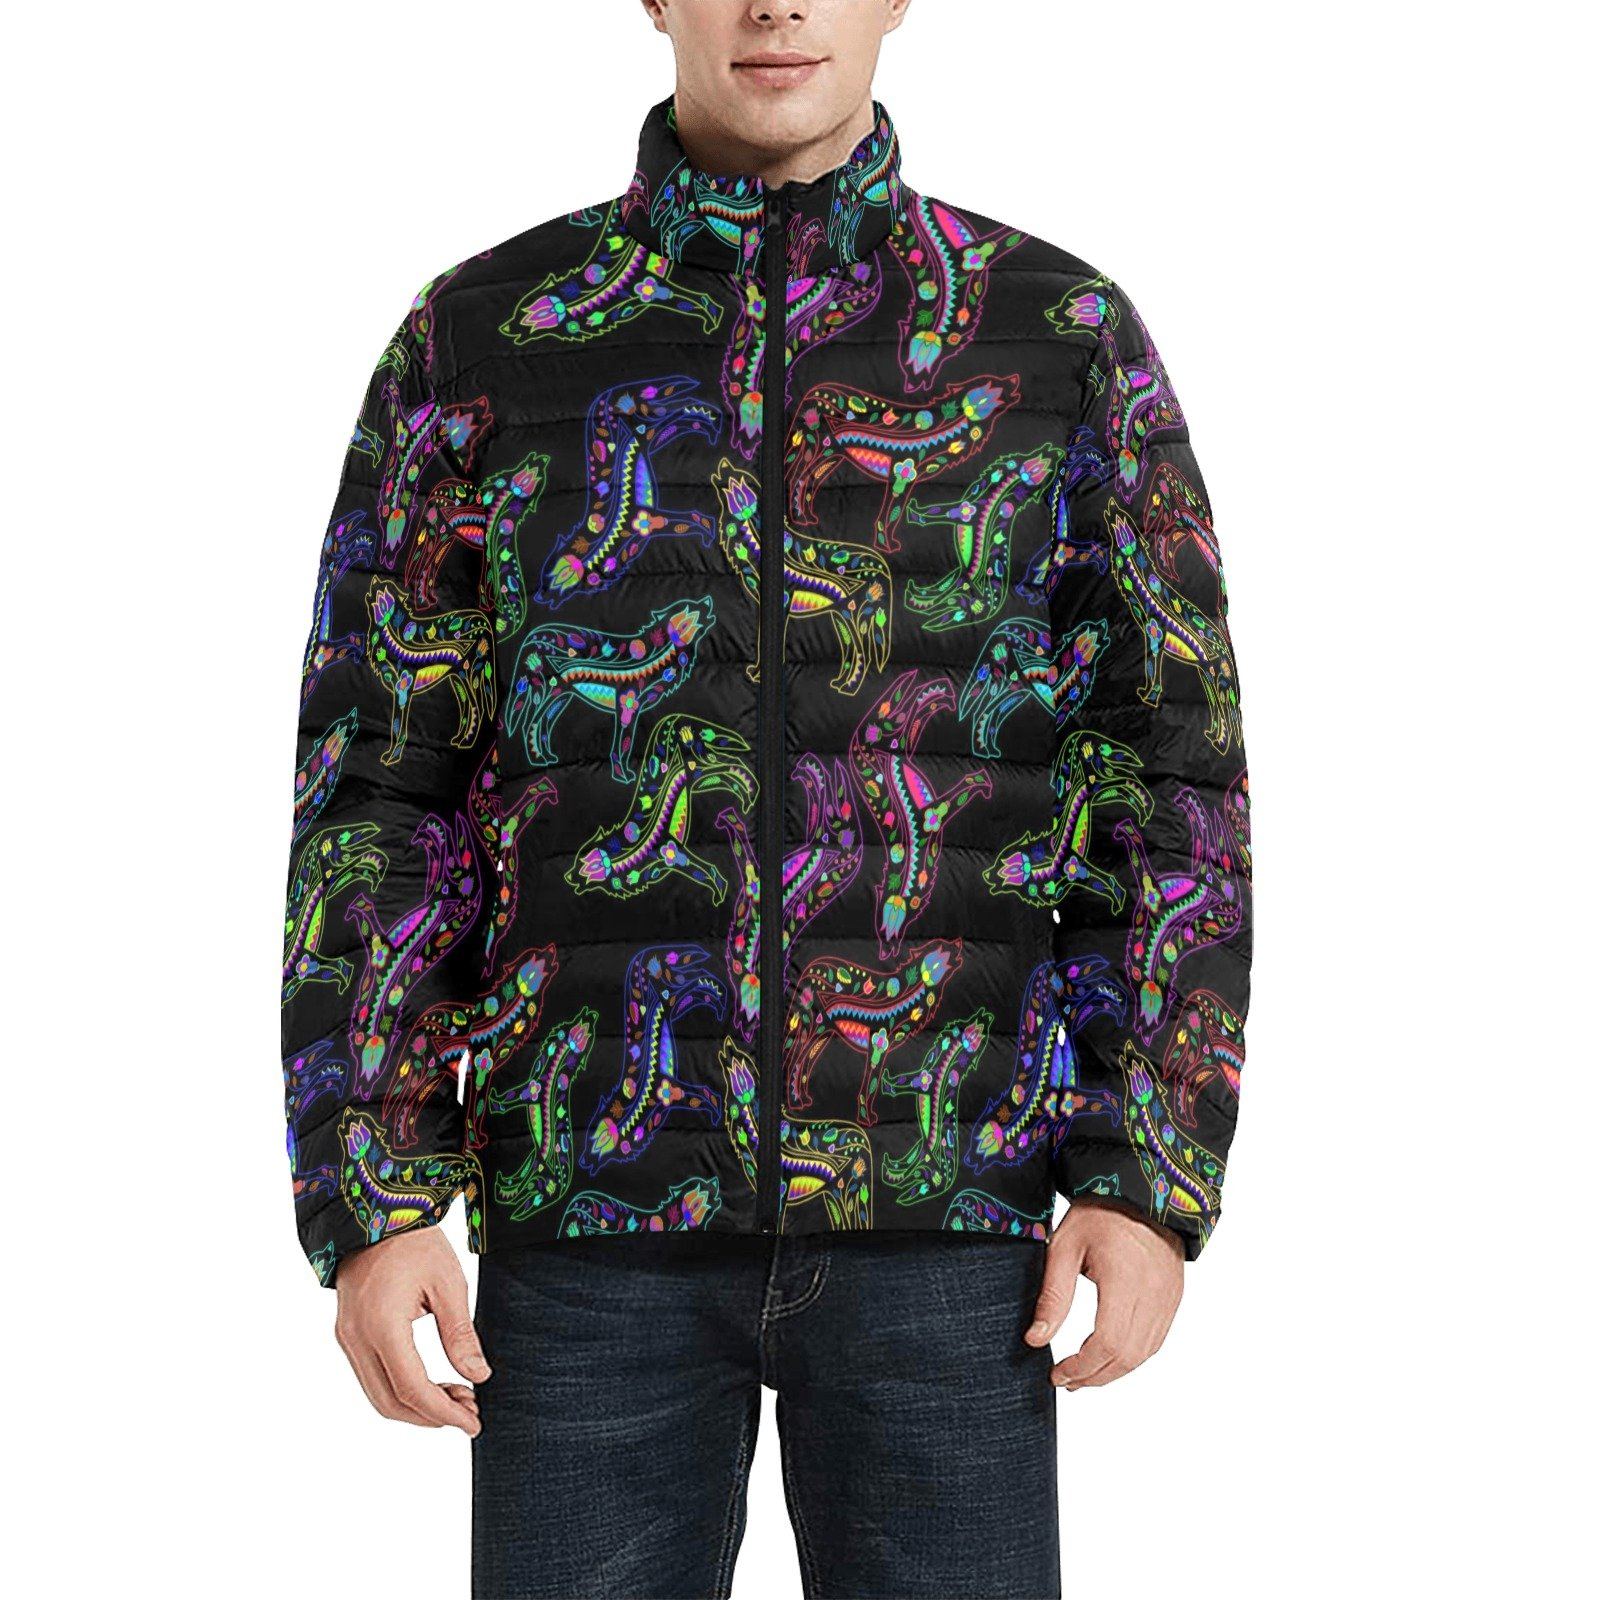 Floral Wolves Men's Stand Collar Padded Jacket (Model H41) Men's Stand Collar Padded Jacket (H41) e-joyer 